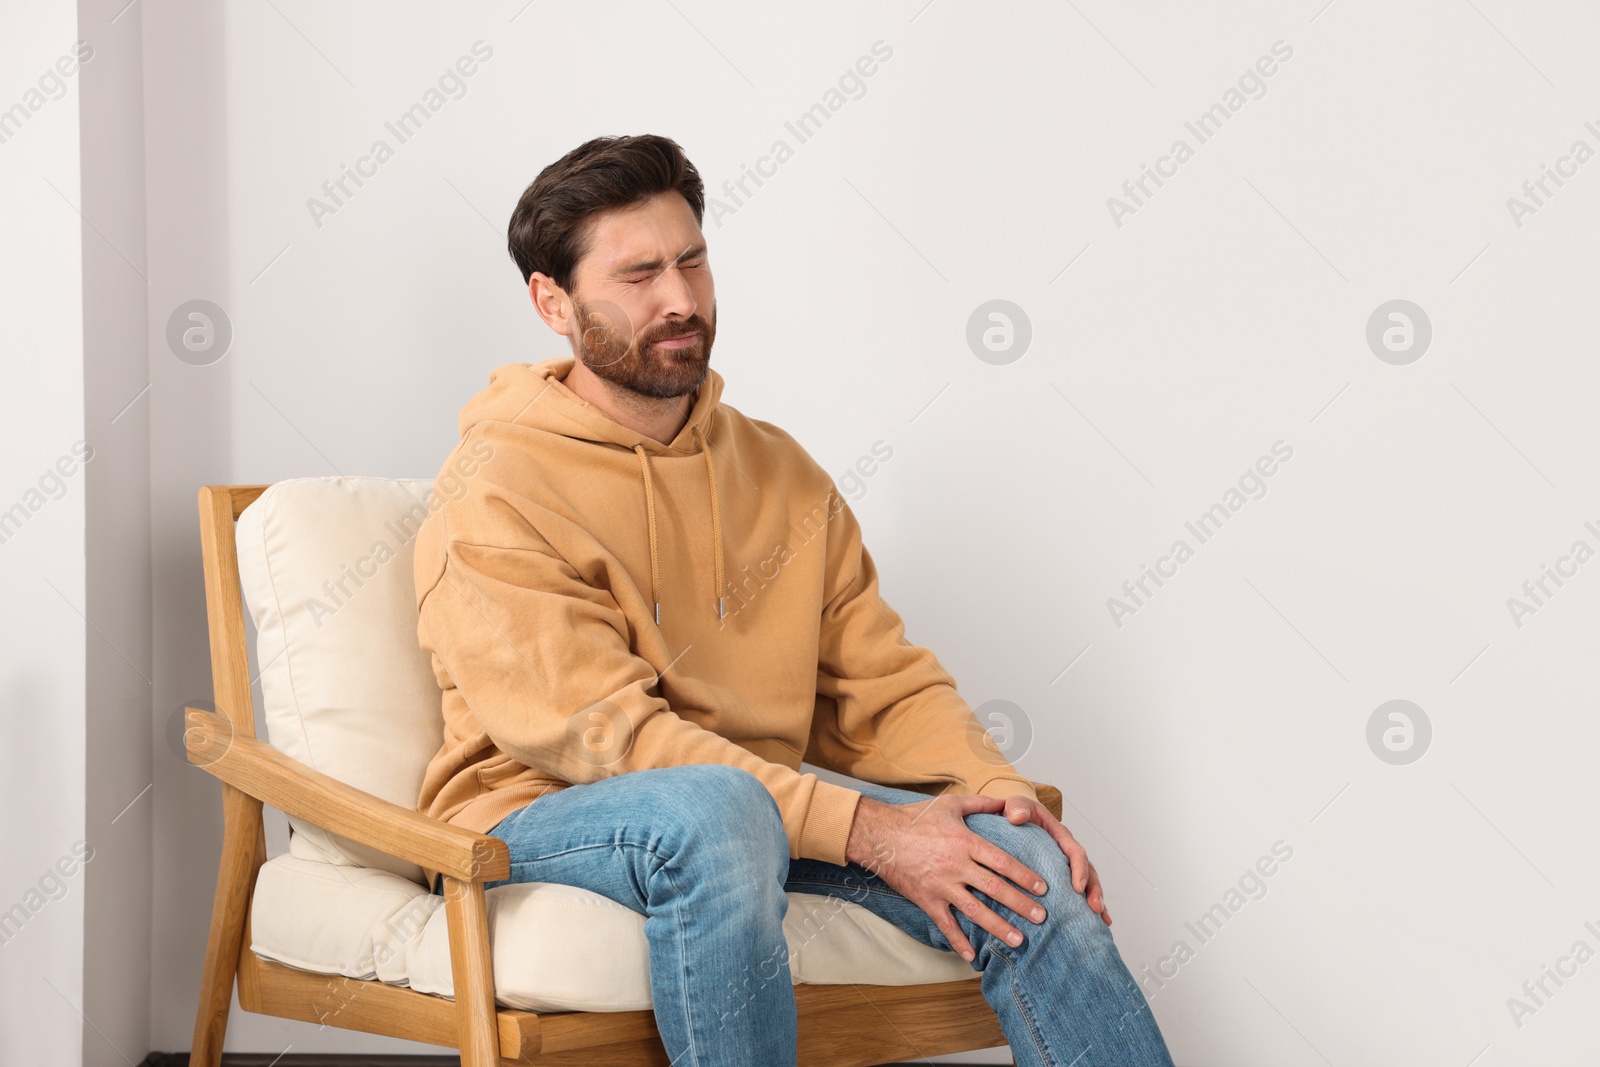 Photo of Man suffering from leg pain and touching knee on soft armchair indoors, space for text